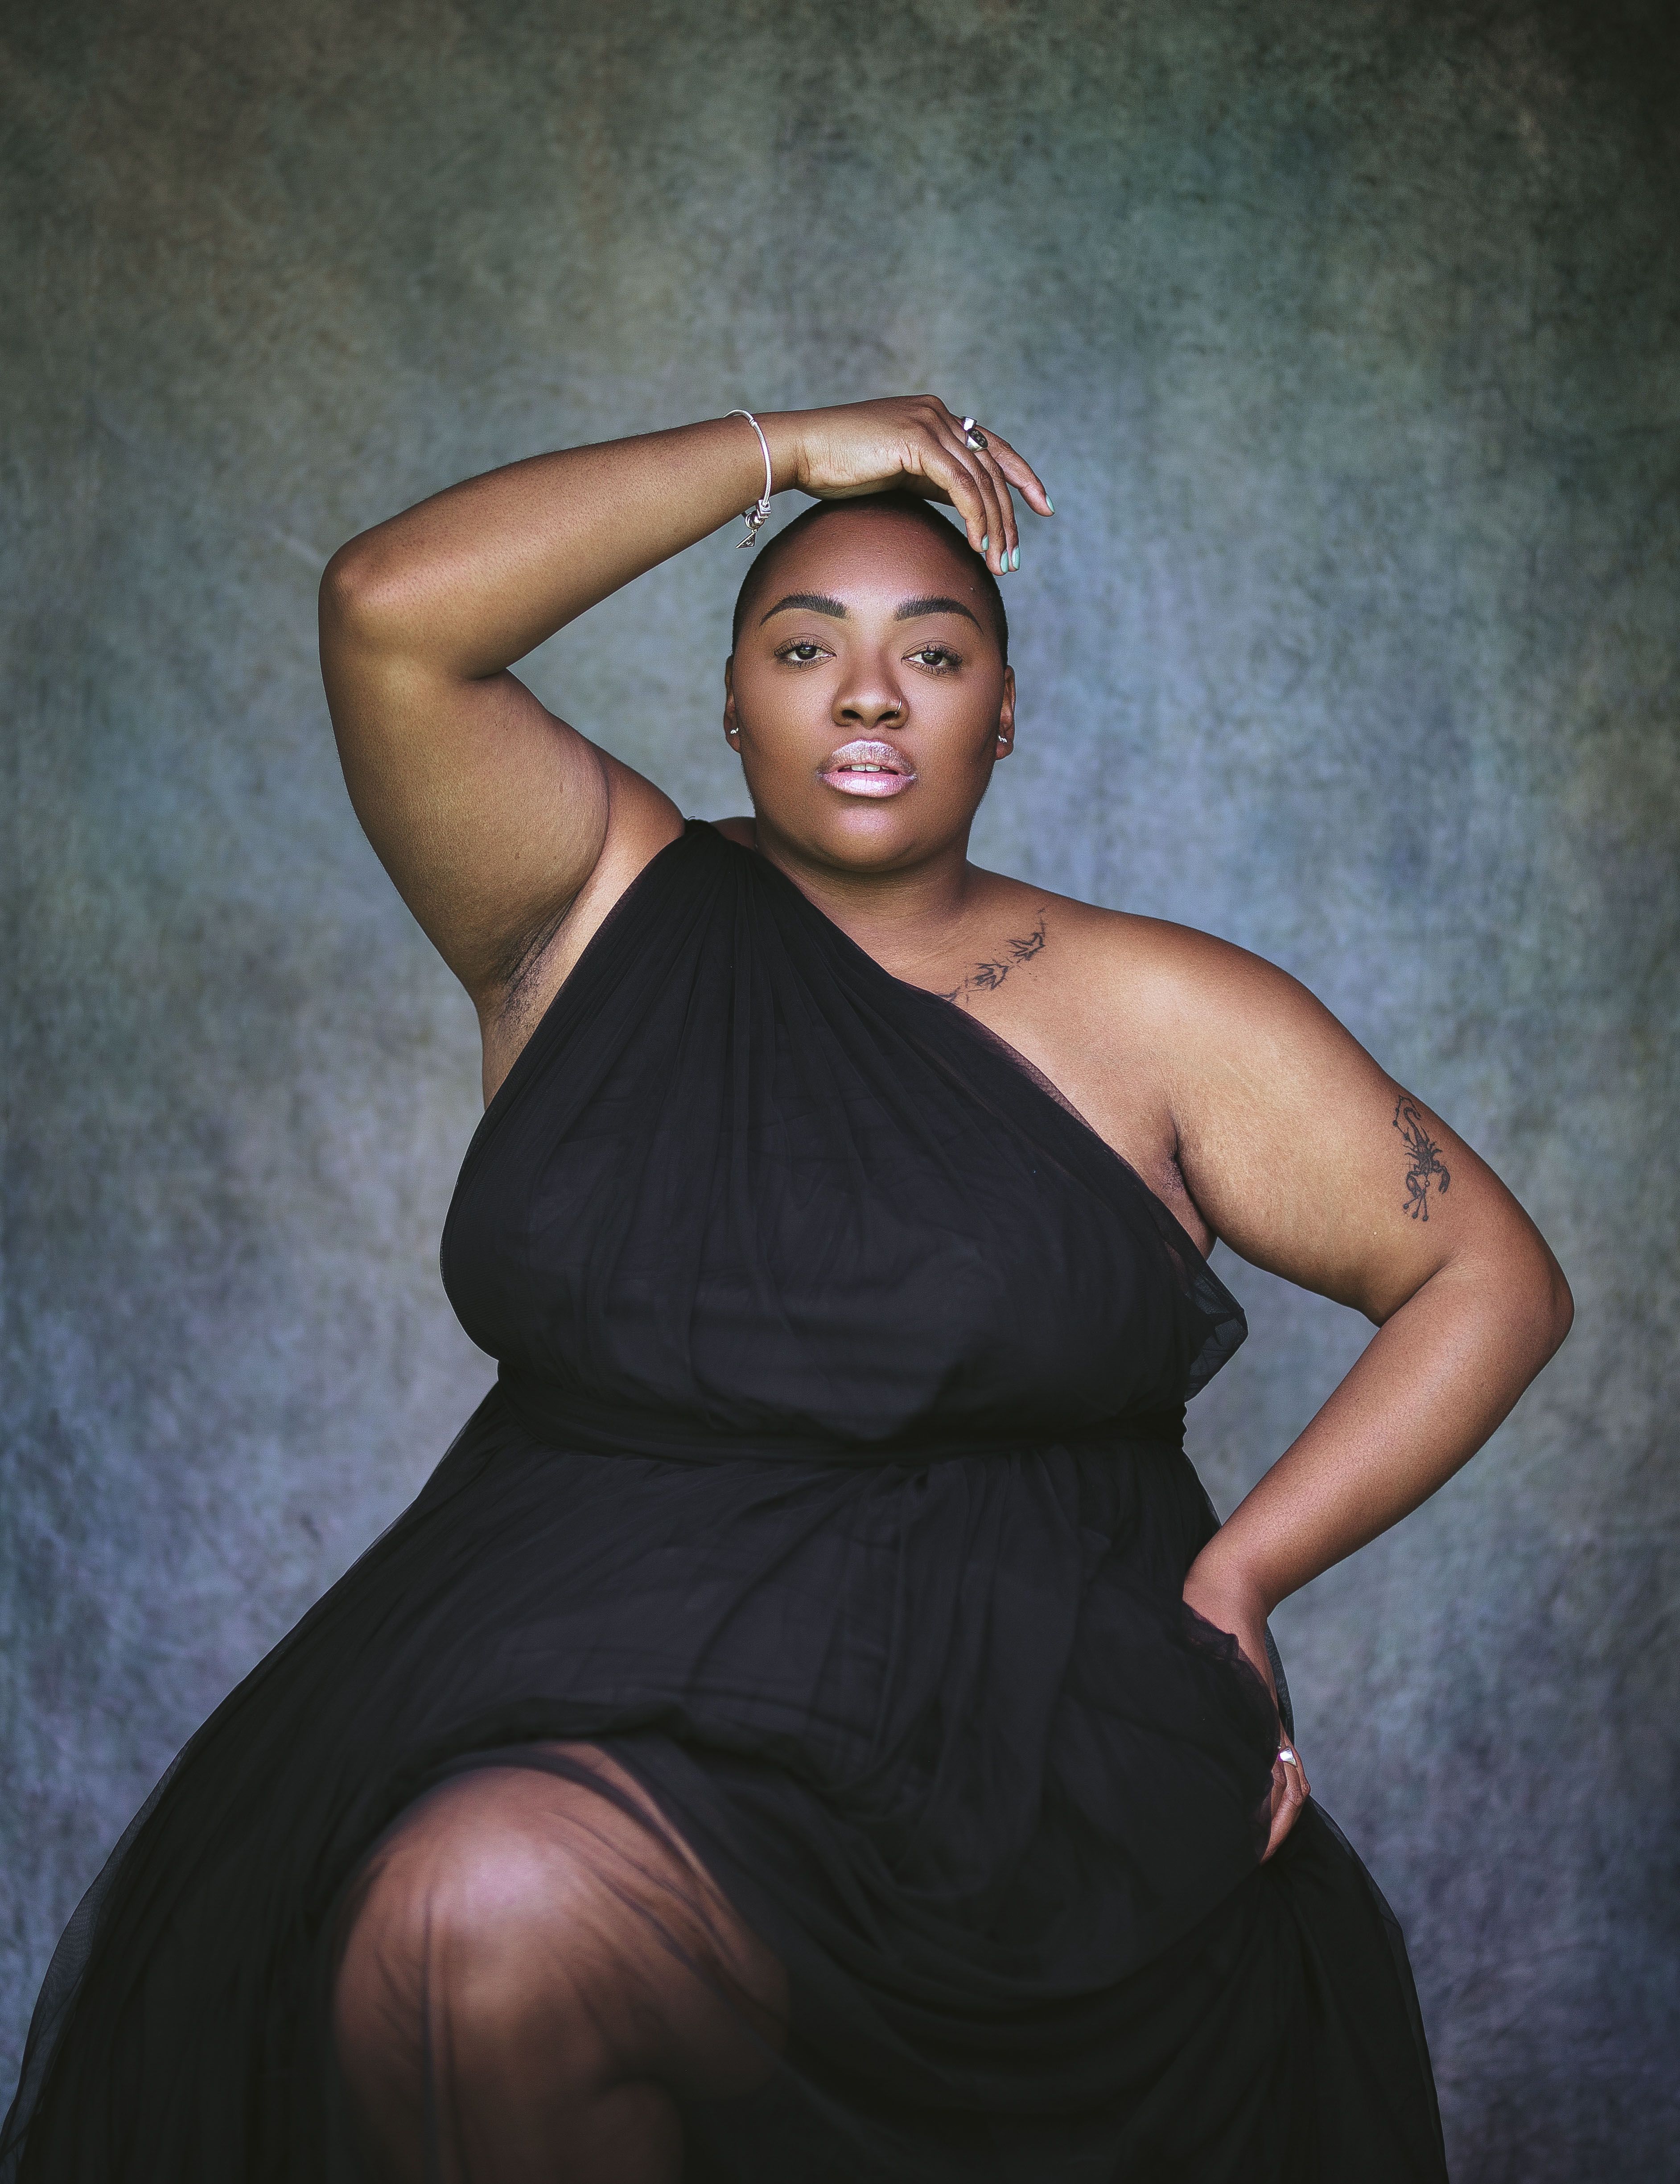 Plus Size Modeling Requirements